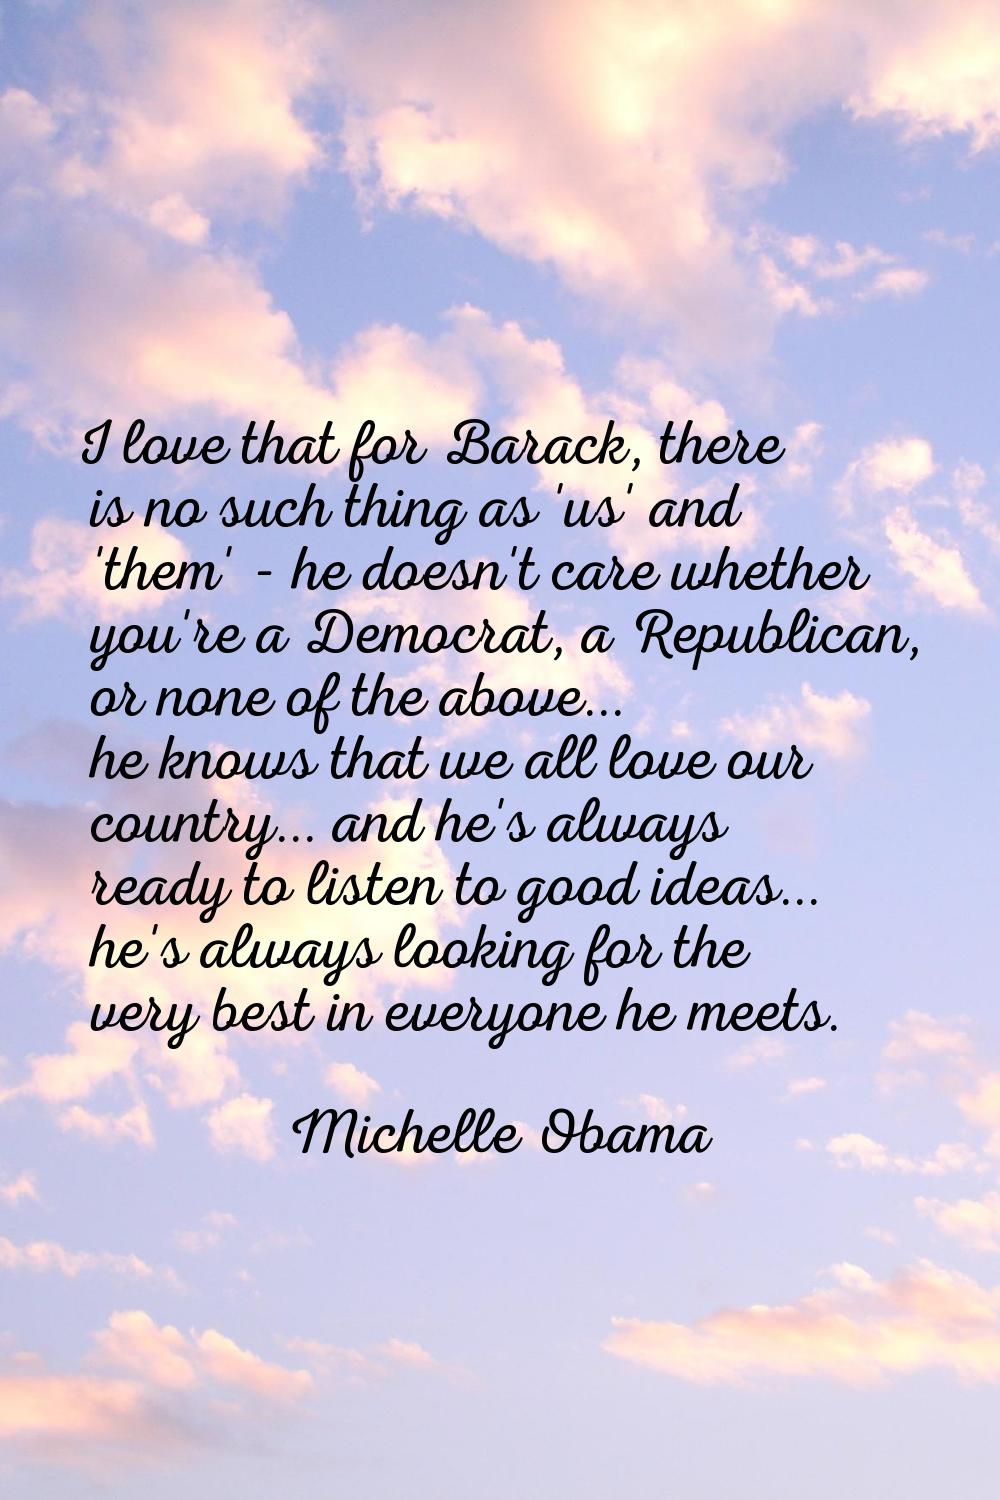 I love that for Barack, there is no such thing as 'us' and 'them' - he doesn't care whether you're 